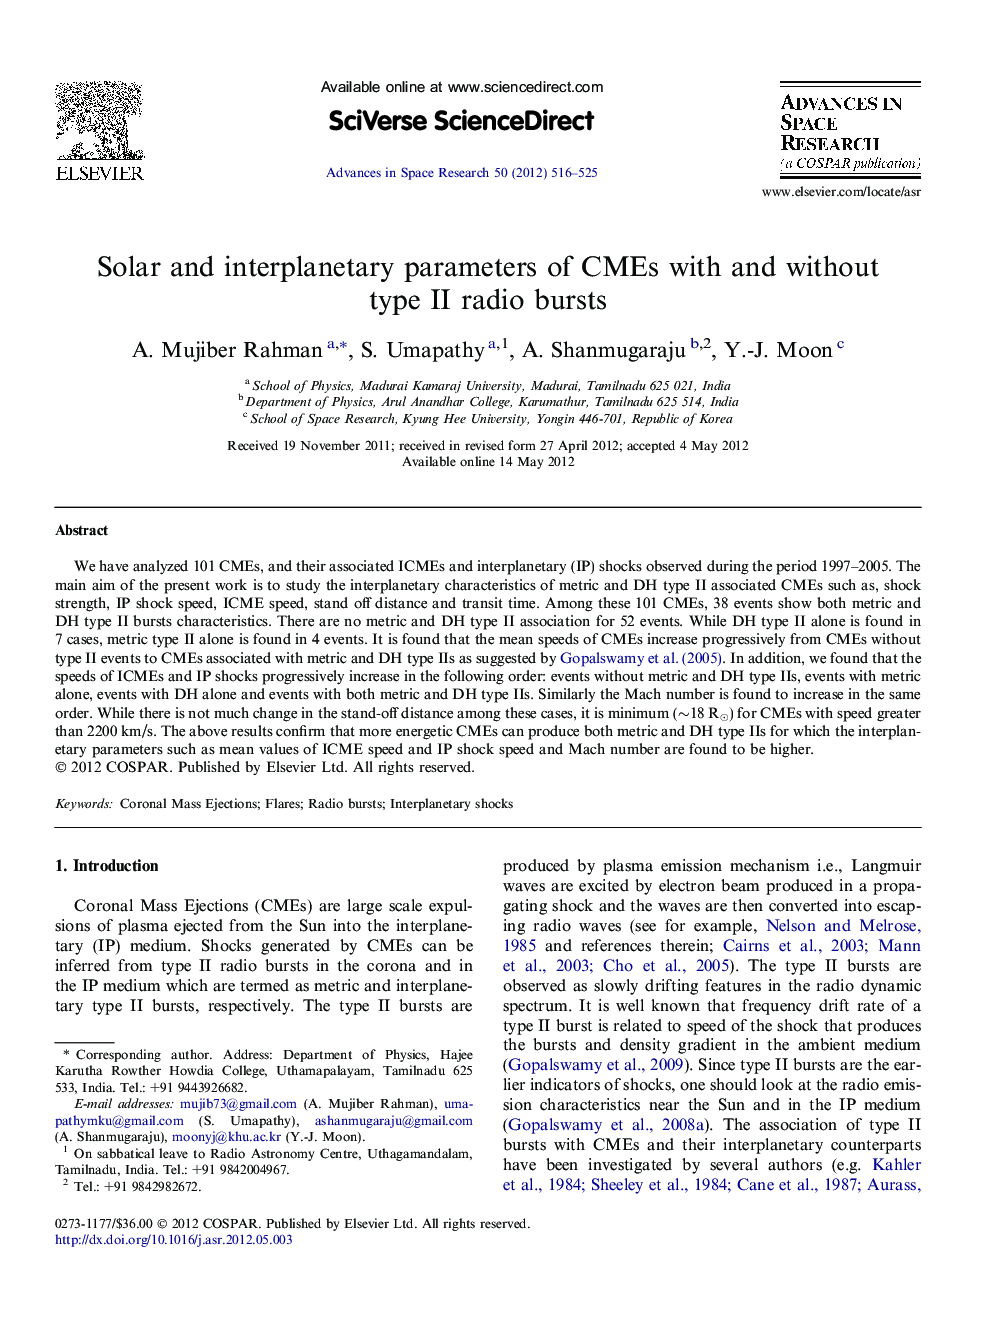 Solar and interplanetary parameters of CMEs with and without type II radio bursts